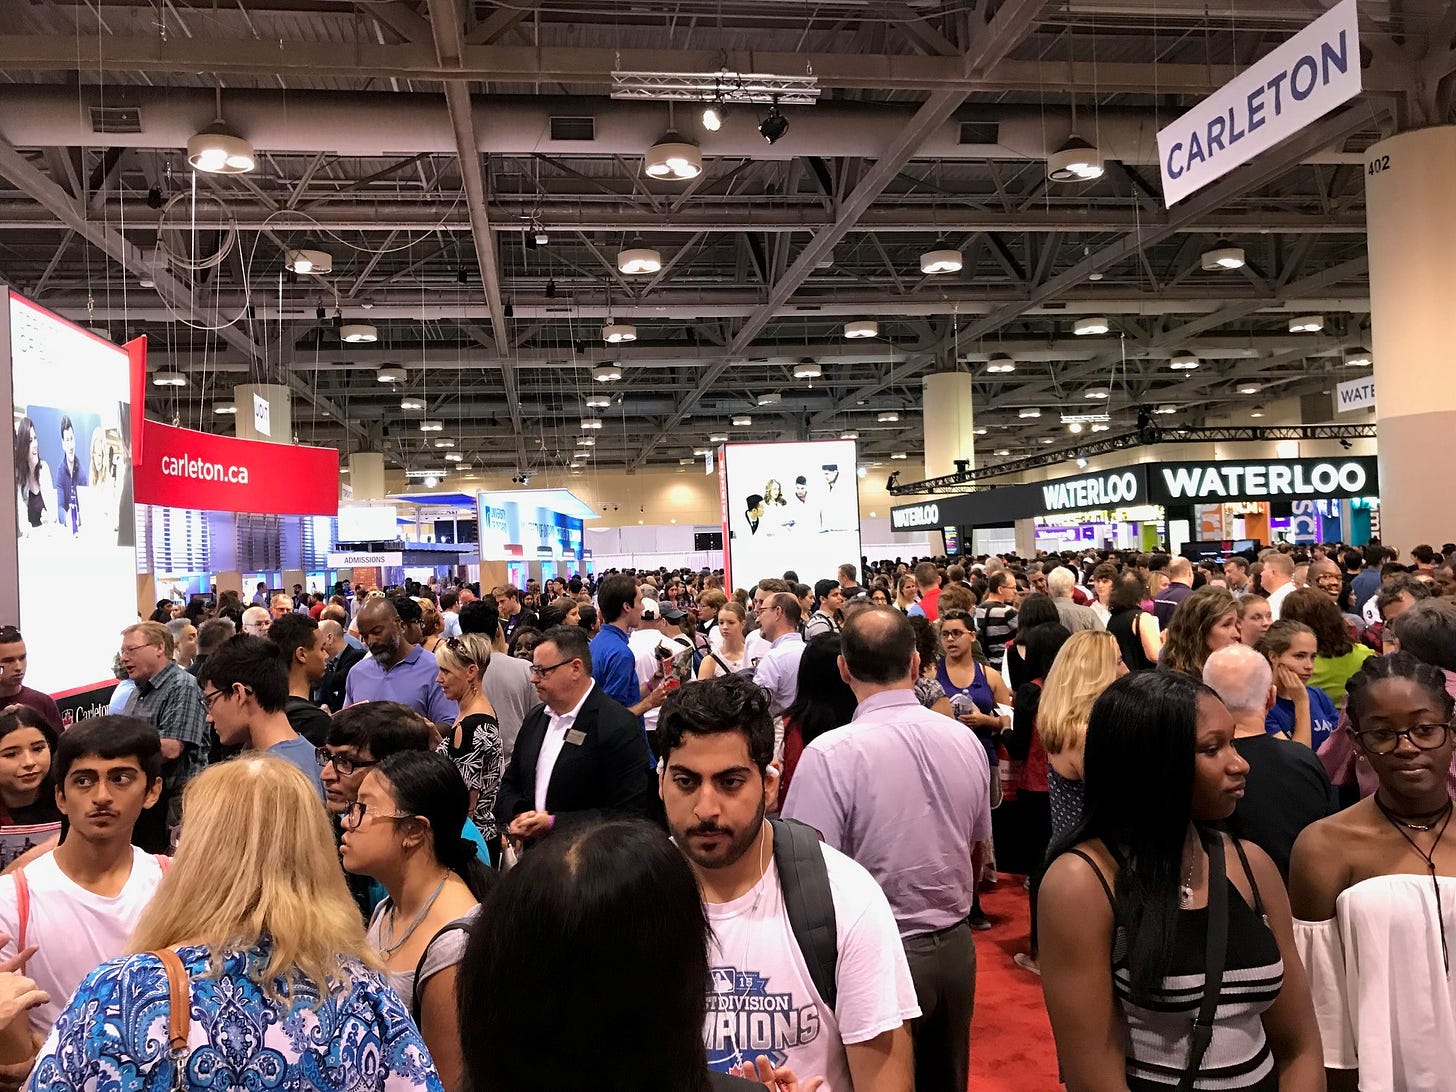 A crowded exhibition hall with university booths.